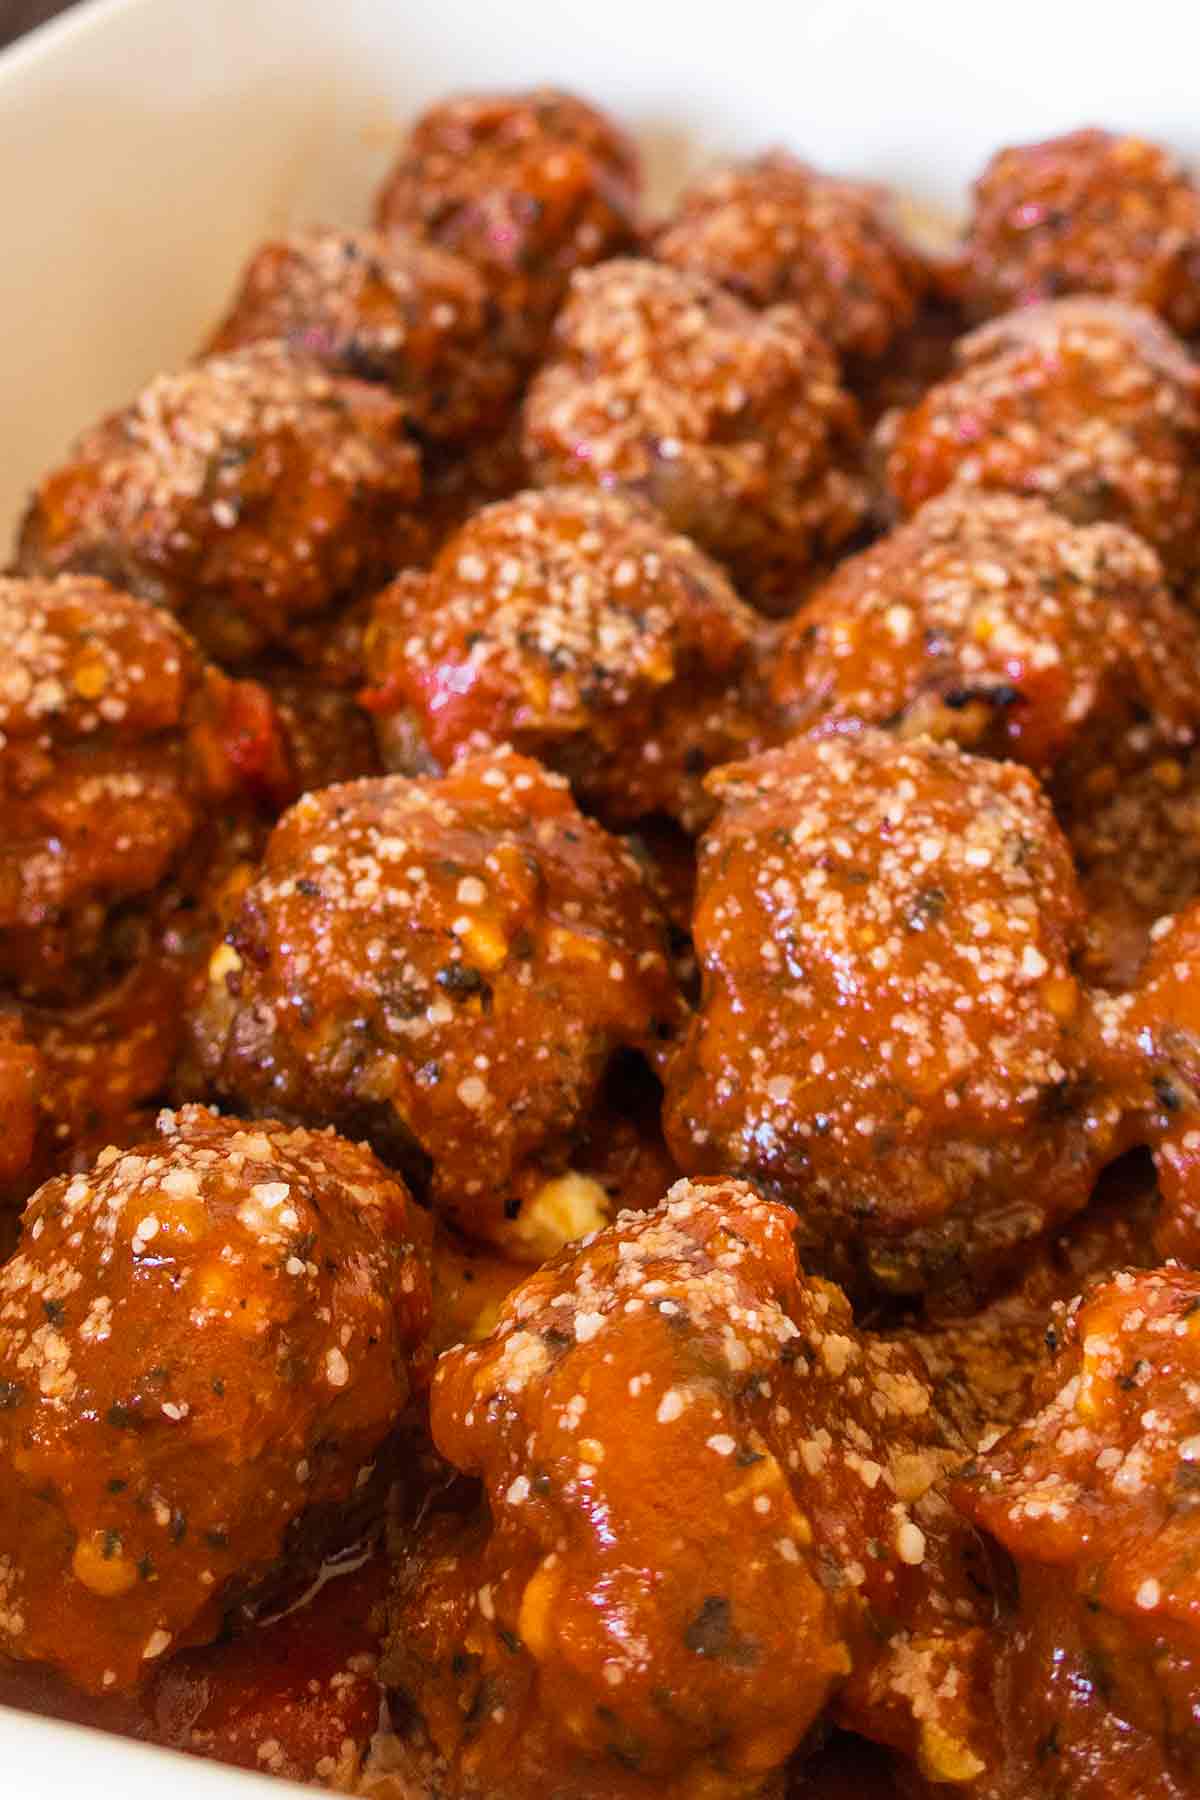 meatballs in a baking dish coated with tomato sauce